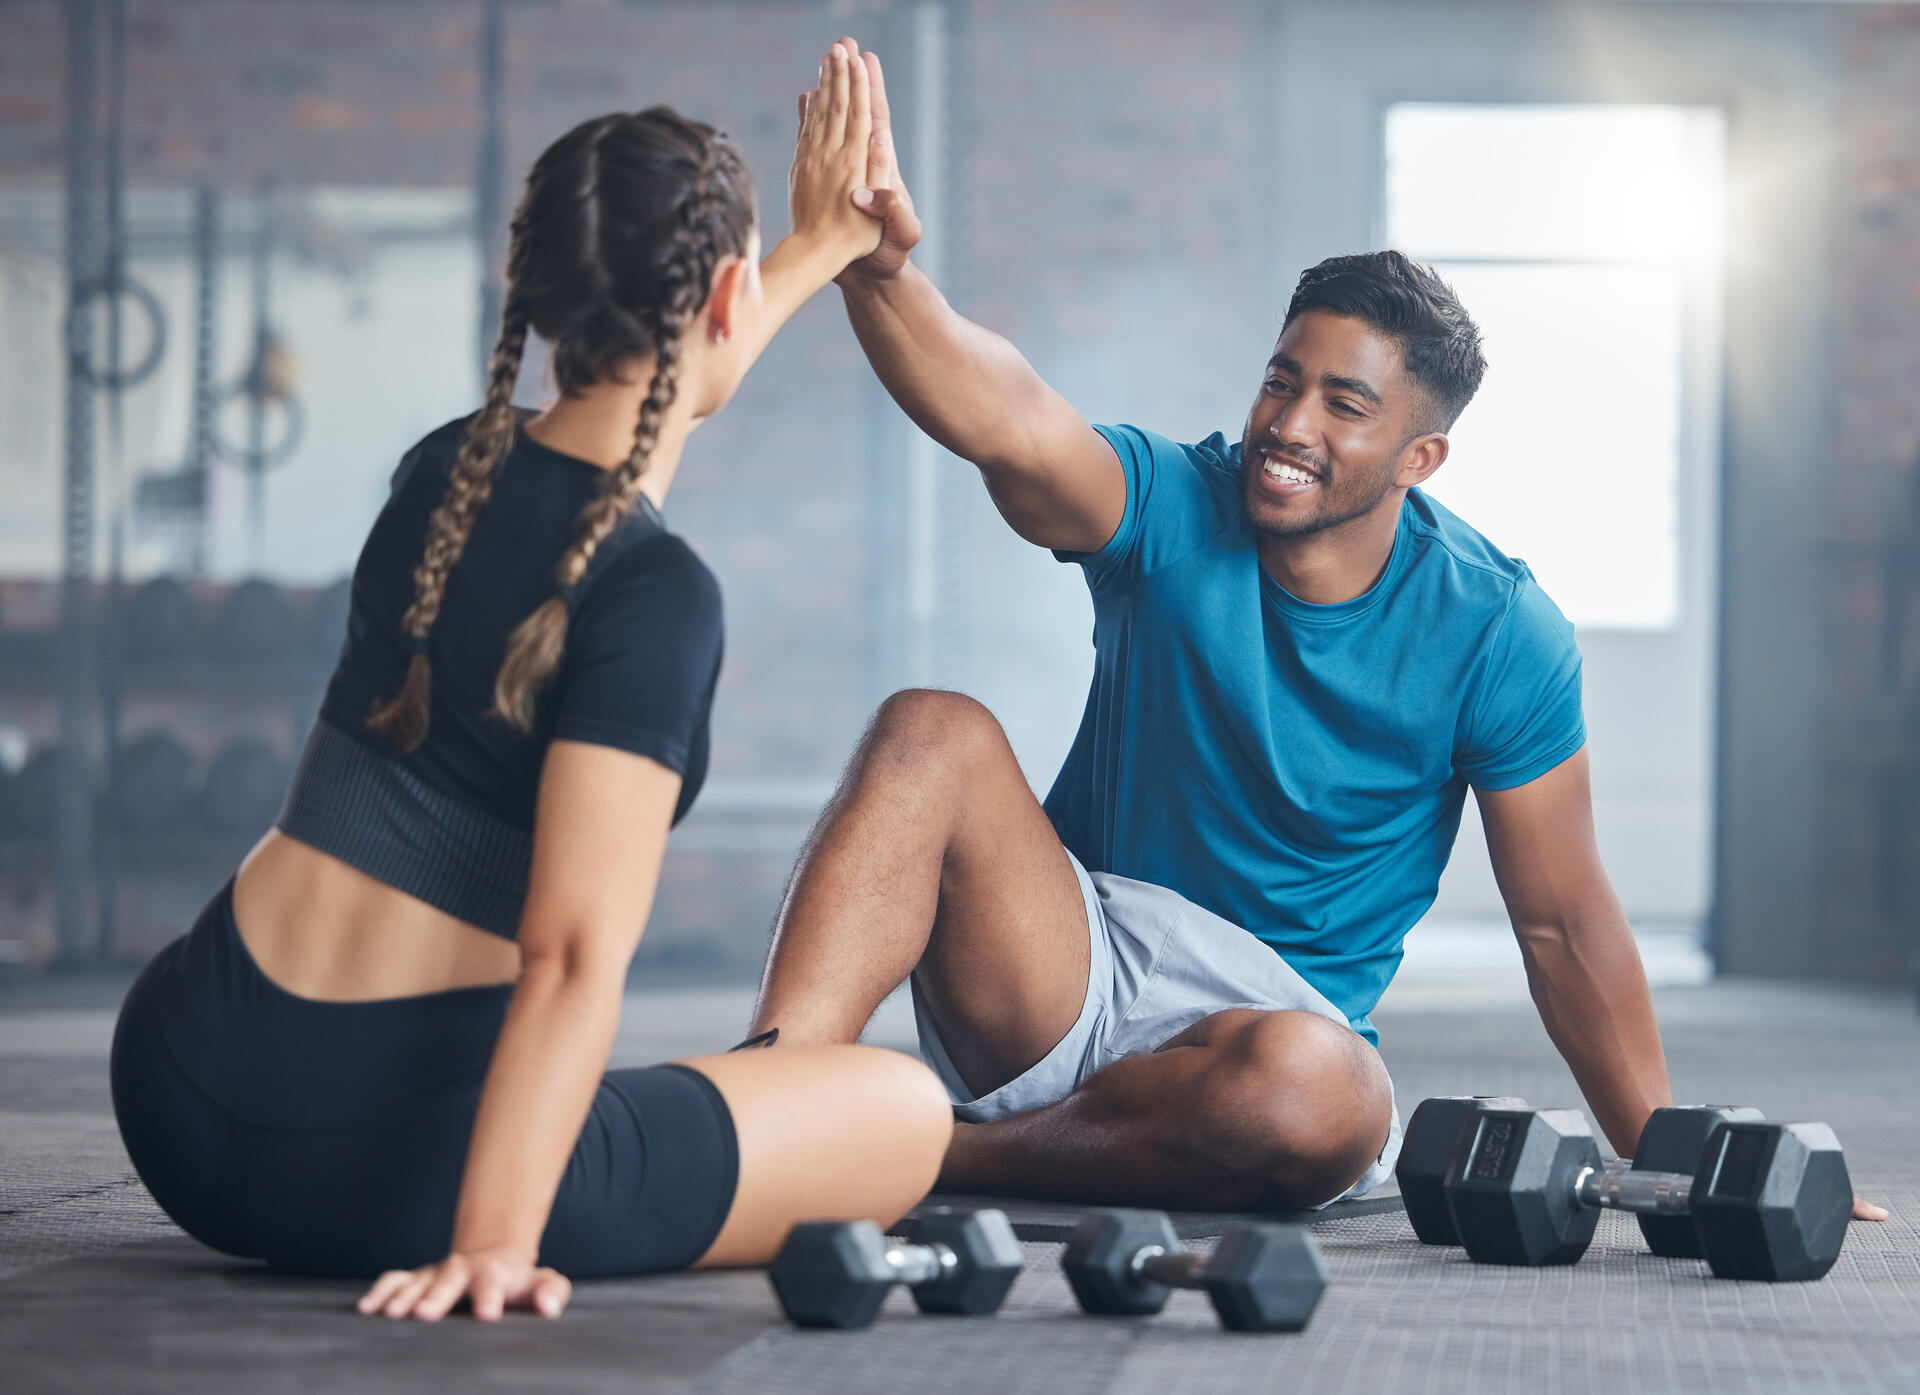 What to look for (and avoid) in a personal trainer